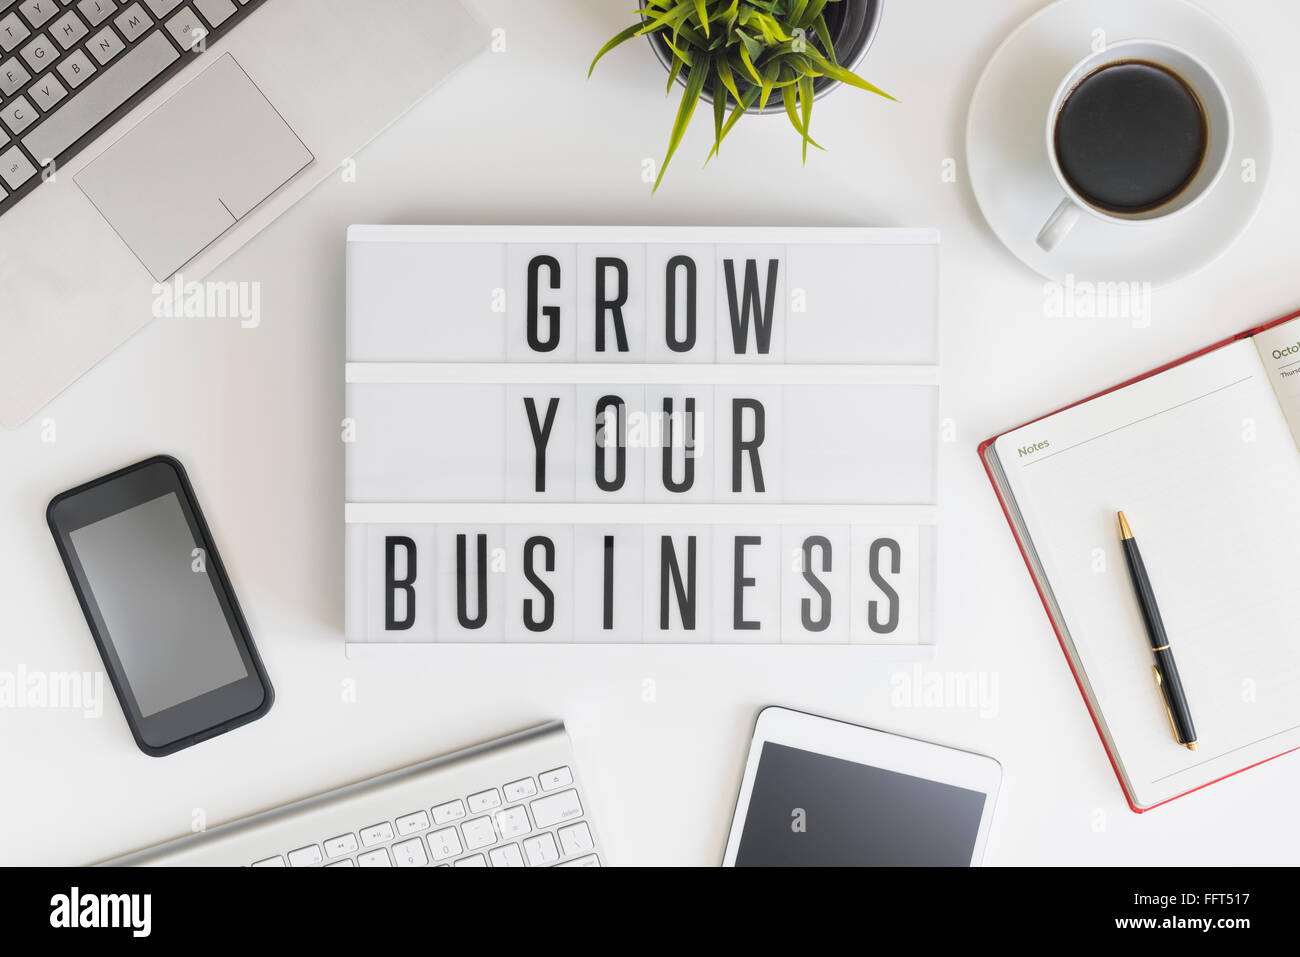 Grow your business Stock Photo